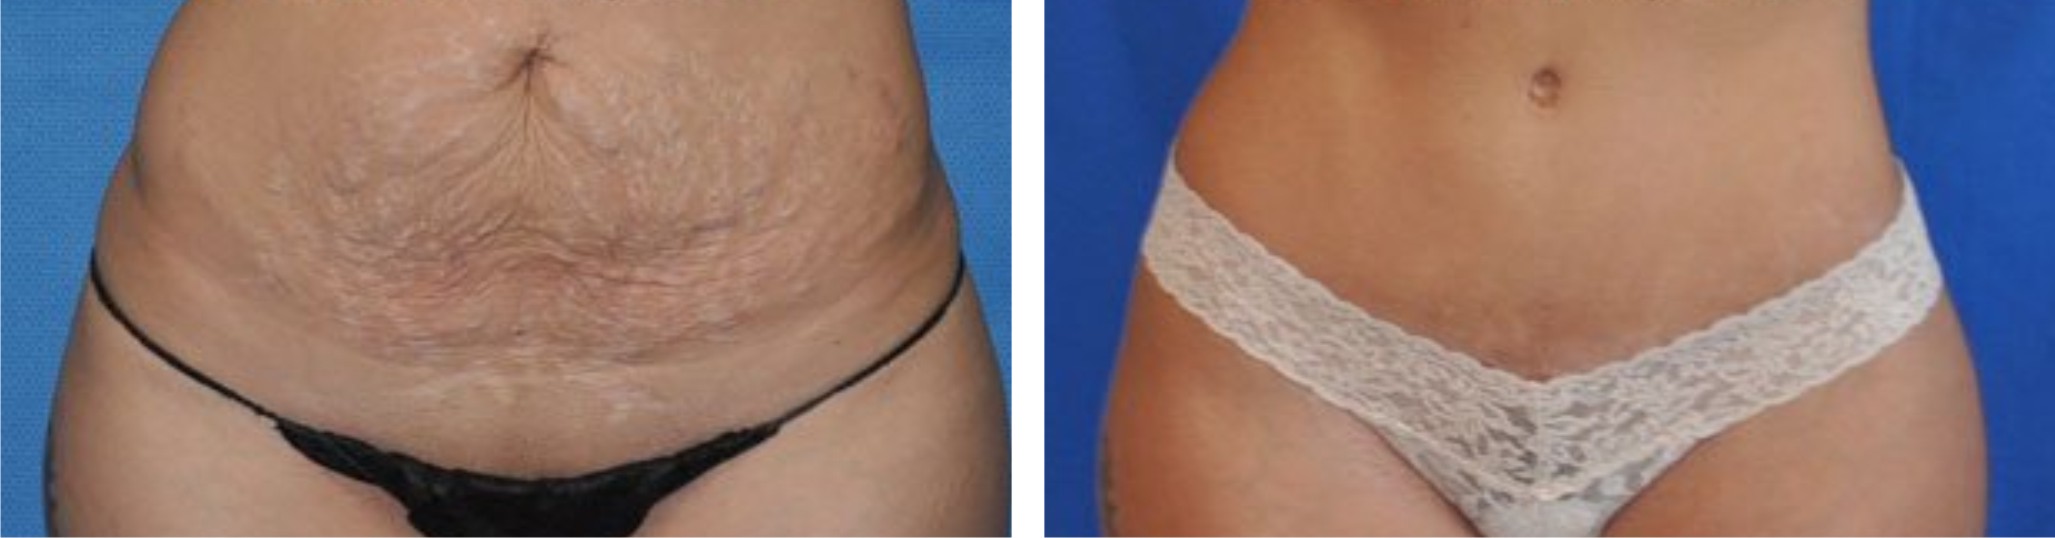 Tummy Tuck Image Two